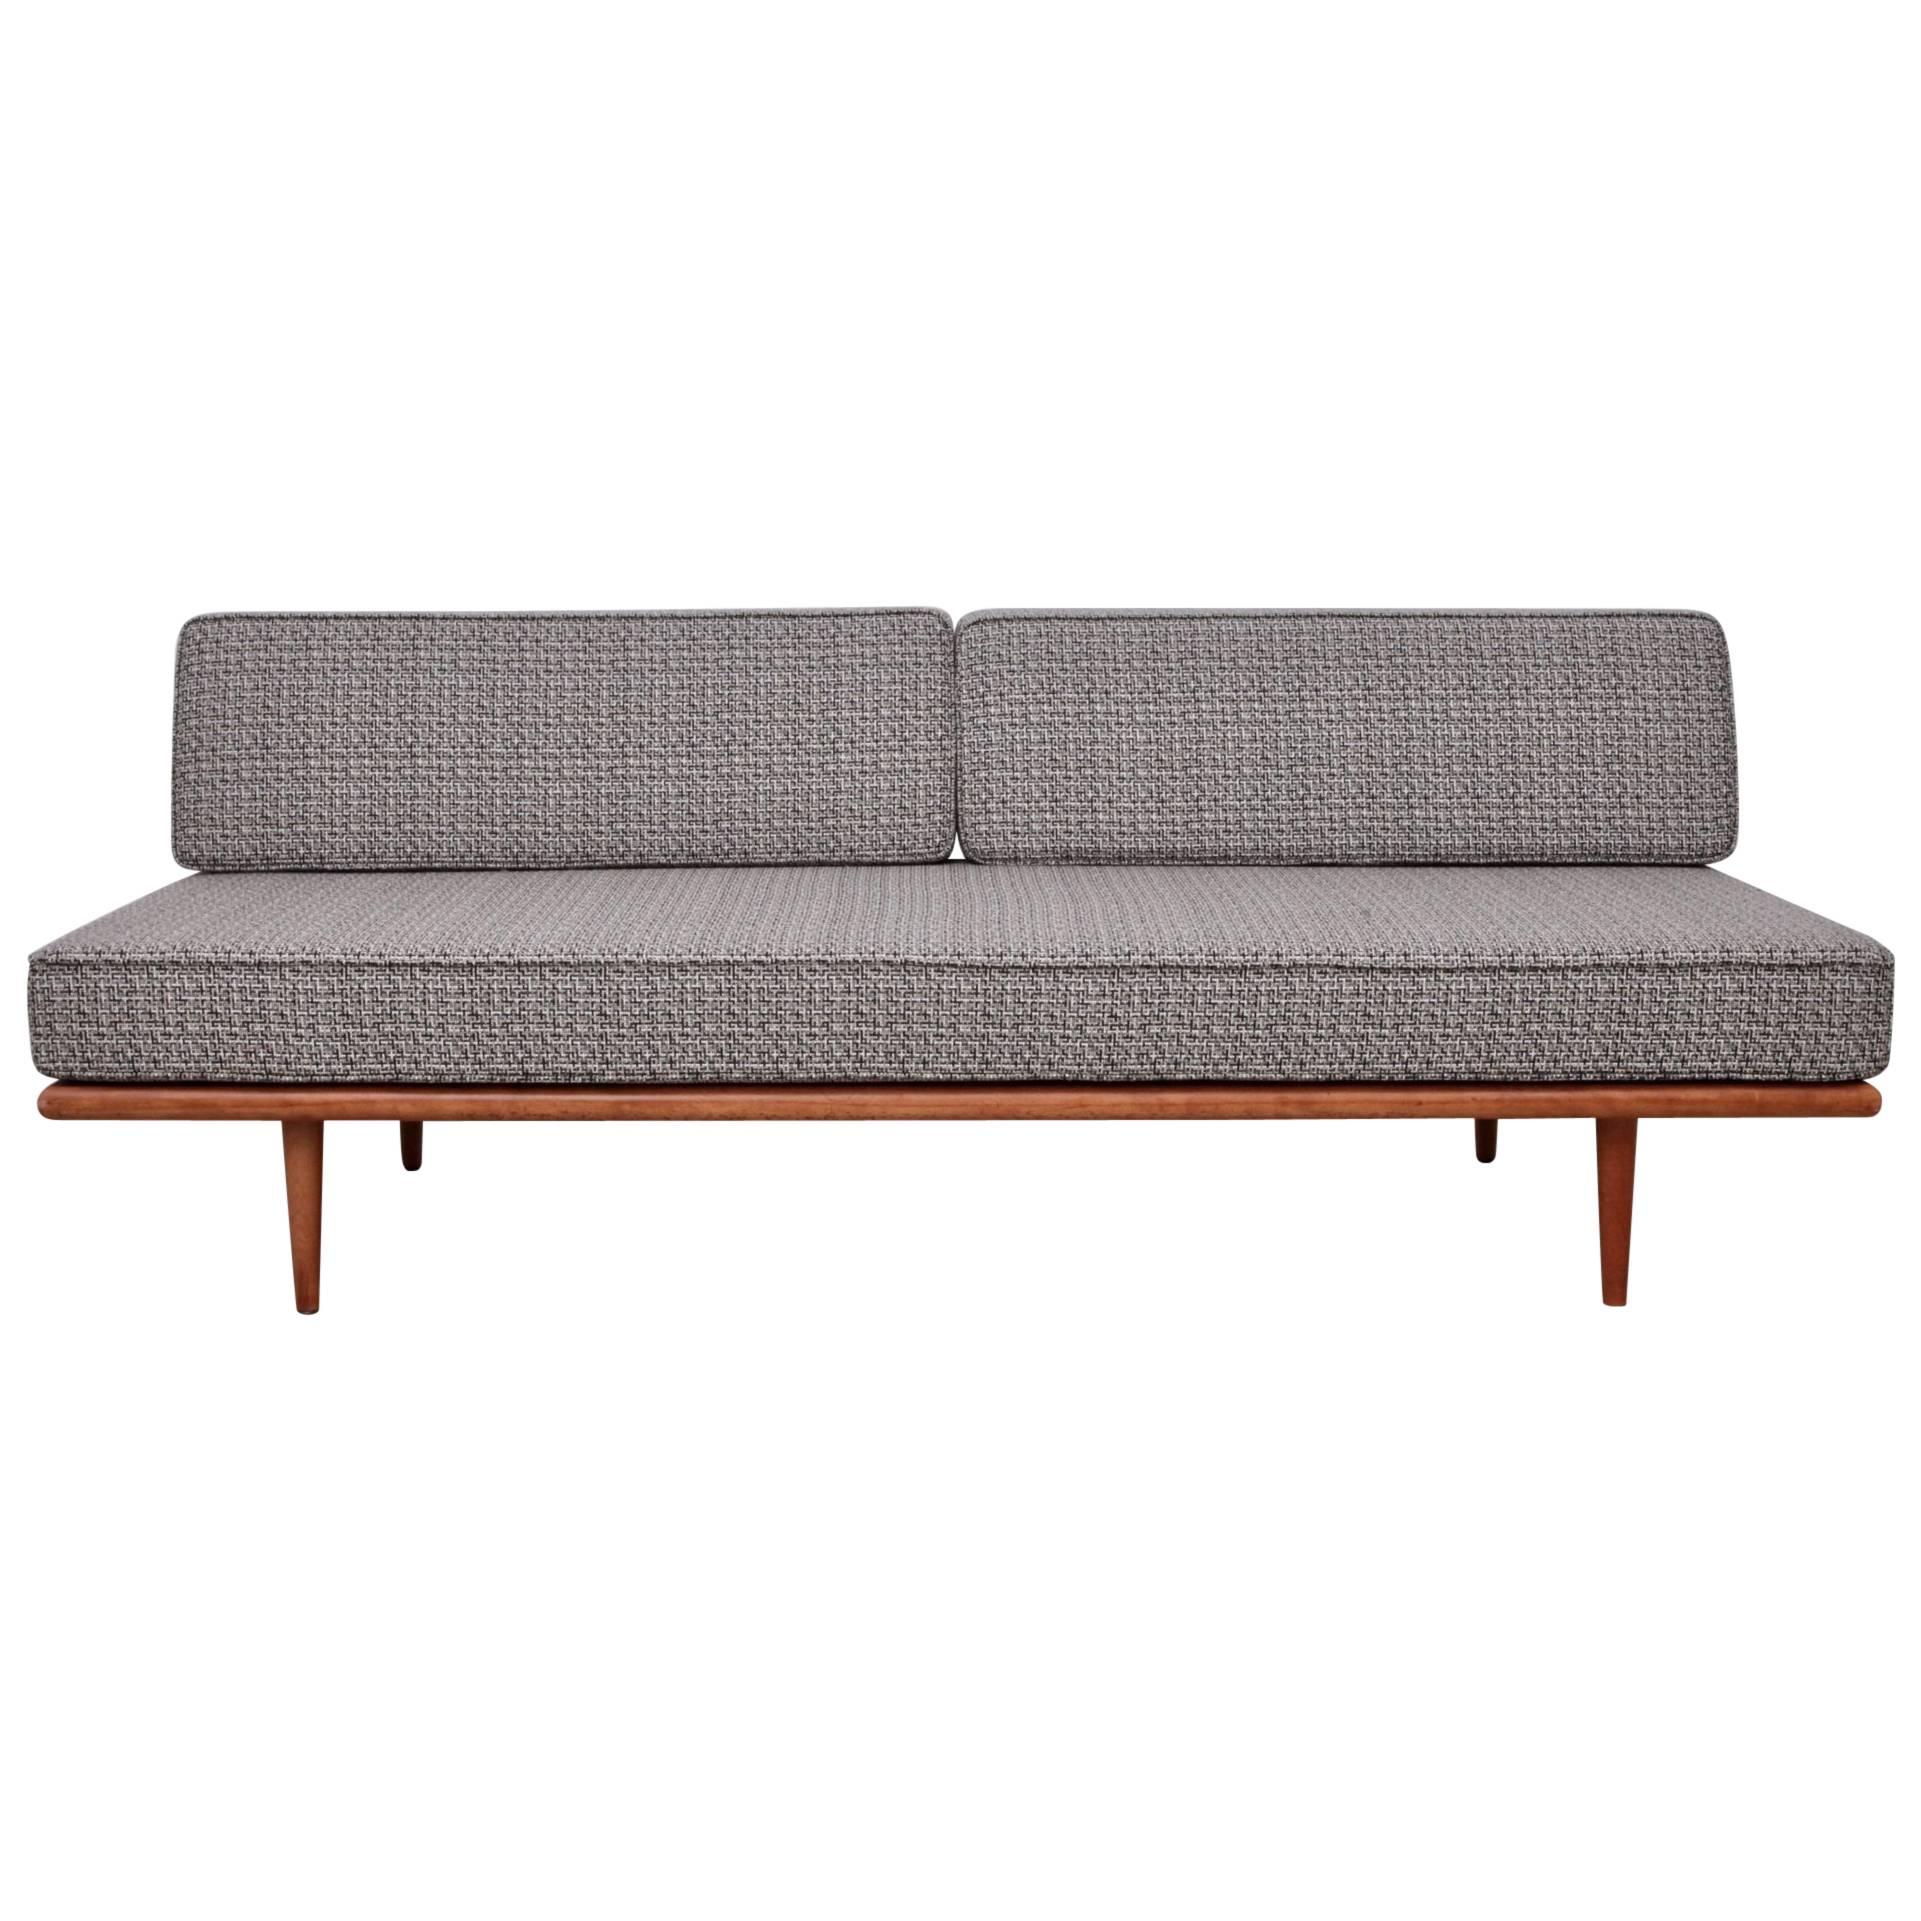 Early George Nelson Daybed for Herman Miller 